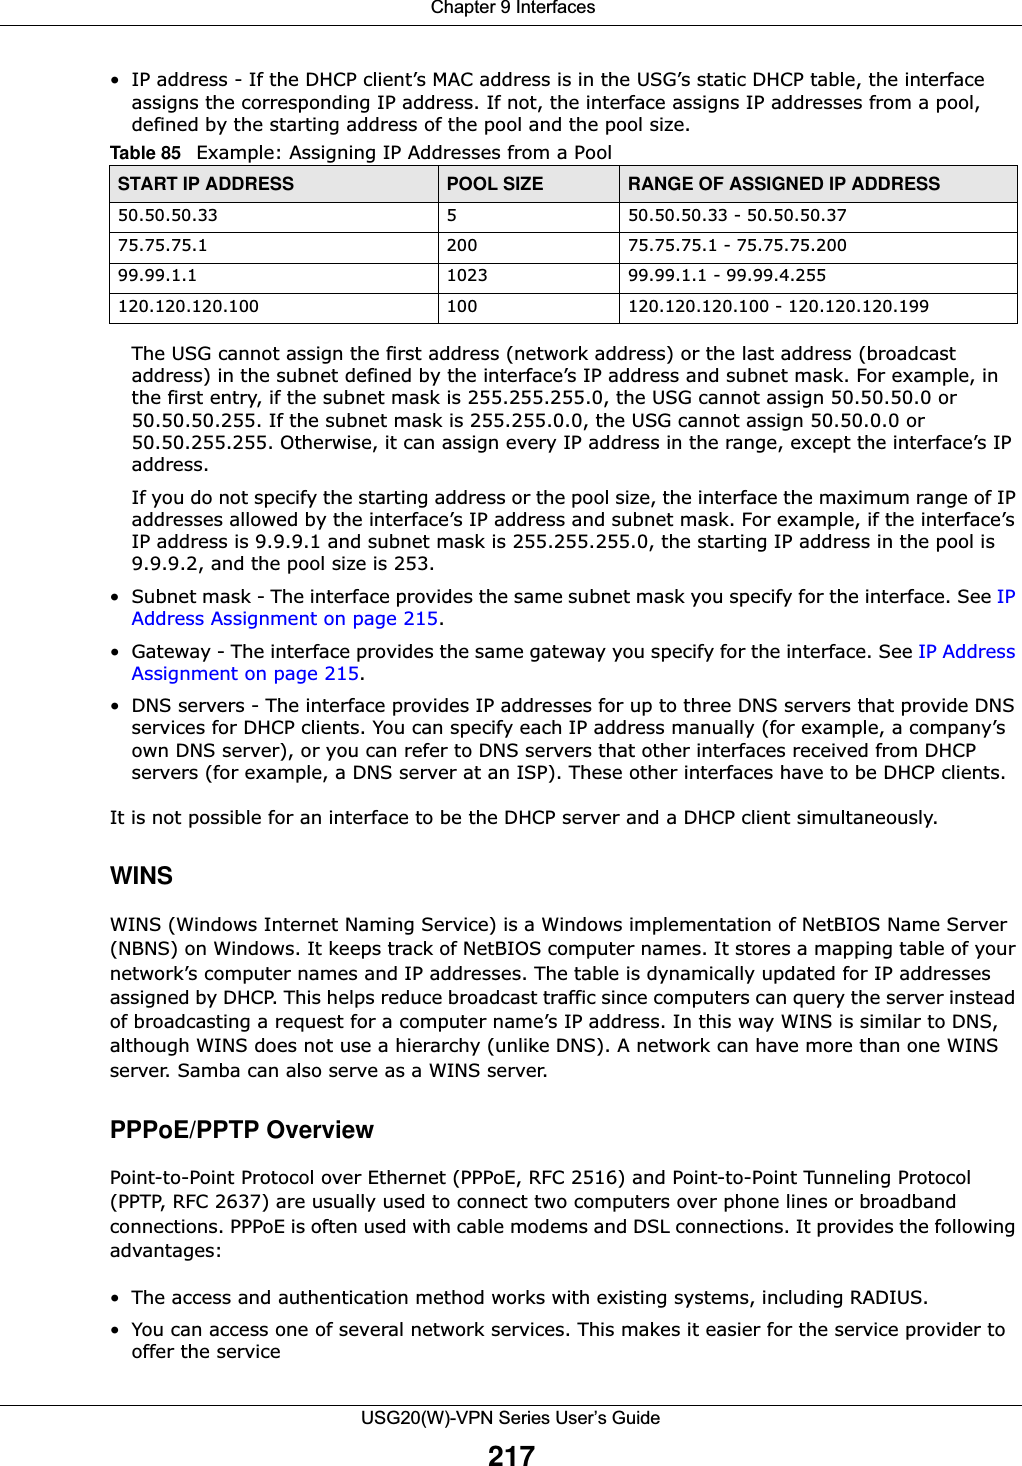  Chapter 9 InterfacesUSG20(W)-VPN Series User’s Guide217• IP address - If the DHCP client’s MAC address is in the USG’s static DHCP table, the interface assigns the corresponding IP address. If not, the interface assigns IP addresses from a pool, defined by the starting address of the pool and the pool size.The USG cannot assign the first address (network address) or the last address (broadcast address) in the subnet defined by the interface’s IP address and subnet mask. For example, in the first entry, if the subnet mask is 255.255.255.0, the USG cannot assign 50.50.50.0 or 50.50.50.255. If the subnet mask is 255.255.0.0, the USG cannot assign 50.50.0.0 or 50.50.255.255. Otherwise, it can assign every IP address in the range, except the interface’s IP address.If you do not specify the starting address or the pool size, the interface the maximum range of IP addresses allowed by the interface’s IP address and subnet mask. For example, if the interface’s IP address is 9.9.9.1 and subnet mask is 255.255.255.0, the starting IP address in the pool is 9.9.9.2, and the pool size is 253.• Subnet mask - The interface provides the same subnet mask you specify for the interface. See IP Address Assignment on page 215.• Gateway - The interface provides the same gateway you specify for the interface. See IP Address Assignment on page 215.• DNS servers - The interface provides IP addresses for up to three DNS servers that provide DNS services for DHCP clients. You can specify each IP address manually (for example, a company’s own DNS server), or you can refer to DNS servers that other interfaces received from DHCP servers (for example, a DNS server at an ISP). These other interfaces have to be DHCP clients.It is not possible for an interface to be the DHCP server and a DHCP client simultaneously.WINSWINS (Windows Internet Naming Service) is a Windows implementation of NetBIOS Name Server (NBNS) on Windows. It keeps track of NetBIOS computer names. It stores a mapping table of your network’s computer names and IP addresses. The table is dynamically updated for IP addresses assigned by DHCP. This helps reduce broadcast traffic since computers can query the server instead of broadcasting a request for a computer name’s IP address. In this way WINS is similar to DNS, although WINS does not use a hierarchy (unlike DNS). A network can have more than one WINS server. Samba can also serve as a WINS server.PPPoE/PPTP OverviewPoint-to-Point Protocol over Ethernet (PPPoE, RFC 2516) and Point-to-Point Tunneling Protocol (PPTP, RFC 2637) are usually used to connect two computers over phone lines or broadband connections. PPPoE is often used with cable modems and DSL connections. It provides the following advantages:• The access and authentication method works with existing systems, including RADIUS.• You can access one of several network services. This makes it easier for the service provider to offer the serviceTable 85   Example: Assigning IP Addresses from a PoolSTART IP ADDRESS POOL SIZE RANGE OF ASSIGNED IP ADDRESS50.50.50.33 5 50.50.50.33 - 50.50.50.3775.75.75.1 200 75.75.75.1 - 75.75.75.20099.99.1.1 1023 99.99.1.1 - 99.99.4.255120.120.120.100 100 120.120.120.100 - 120.120.120.199